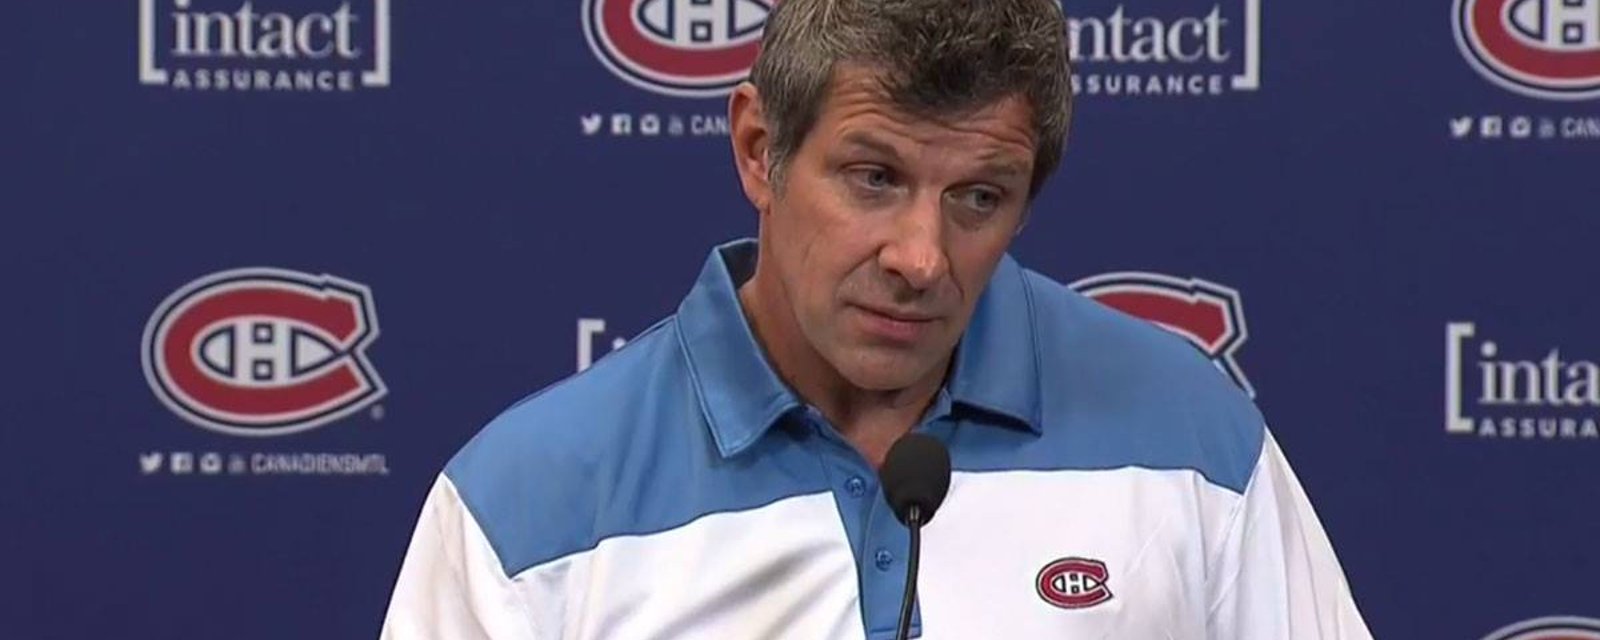 Toronto journalist gives the Canadiens flack over French answers during their press conference.